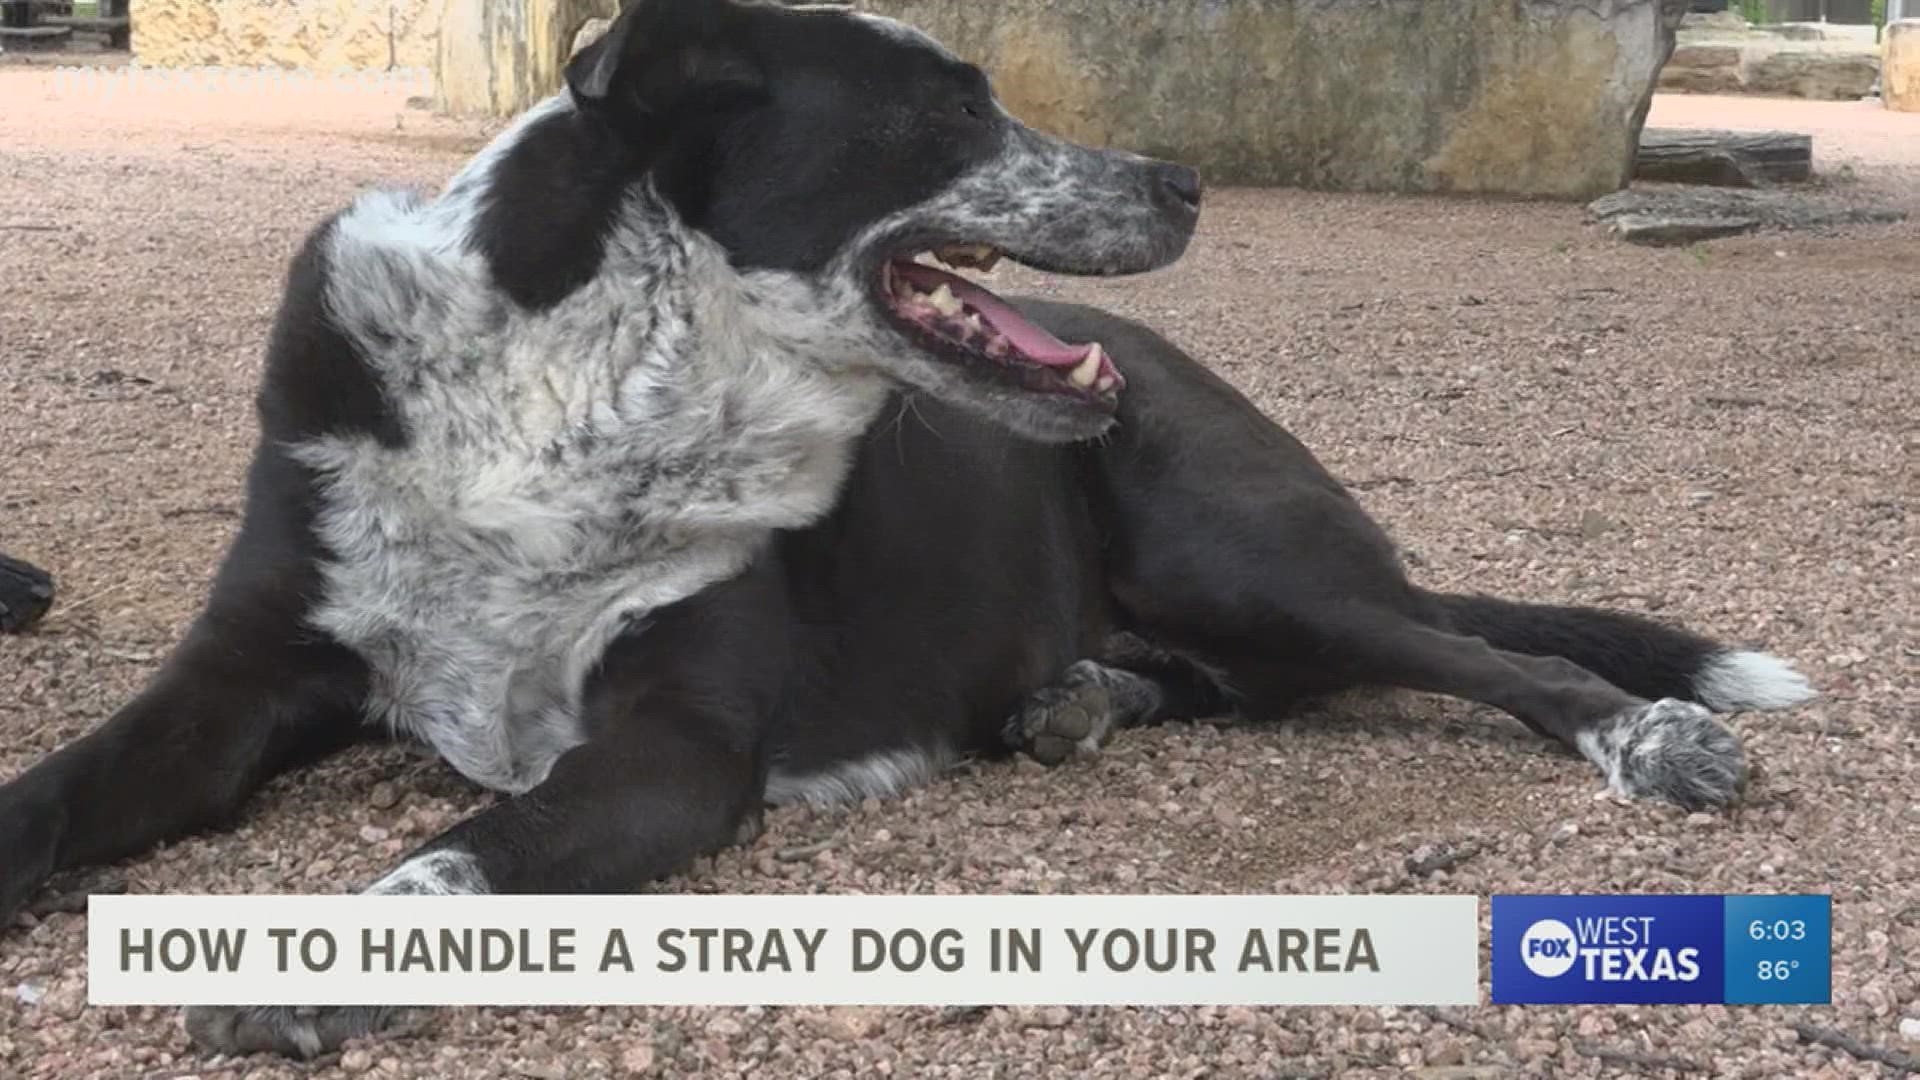 There are a few things suggested for you to do when attempting to handle a stray animal.